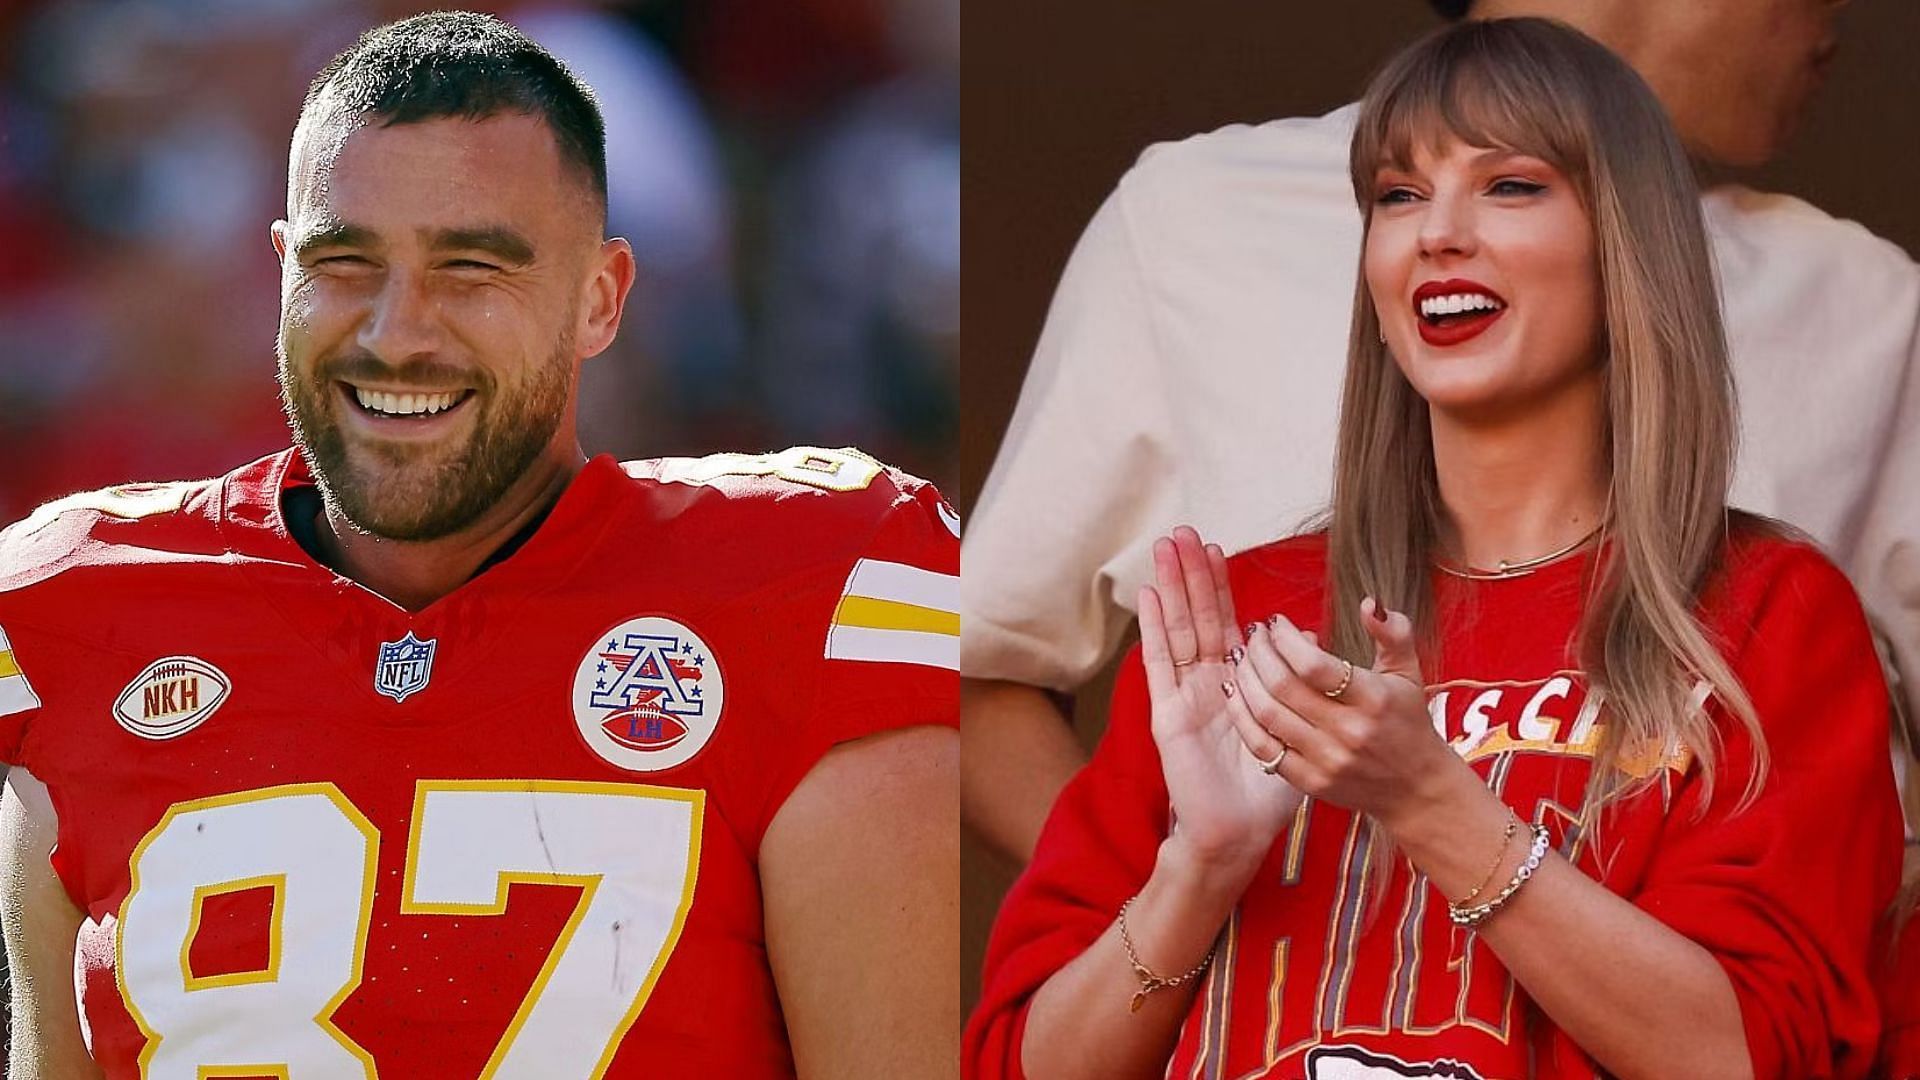 NFL All-Pro tight end Travis Kelce and 12-time Grammy Award winner Taylor Swift